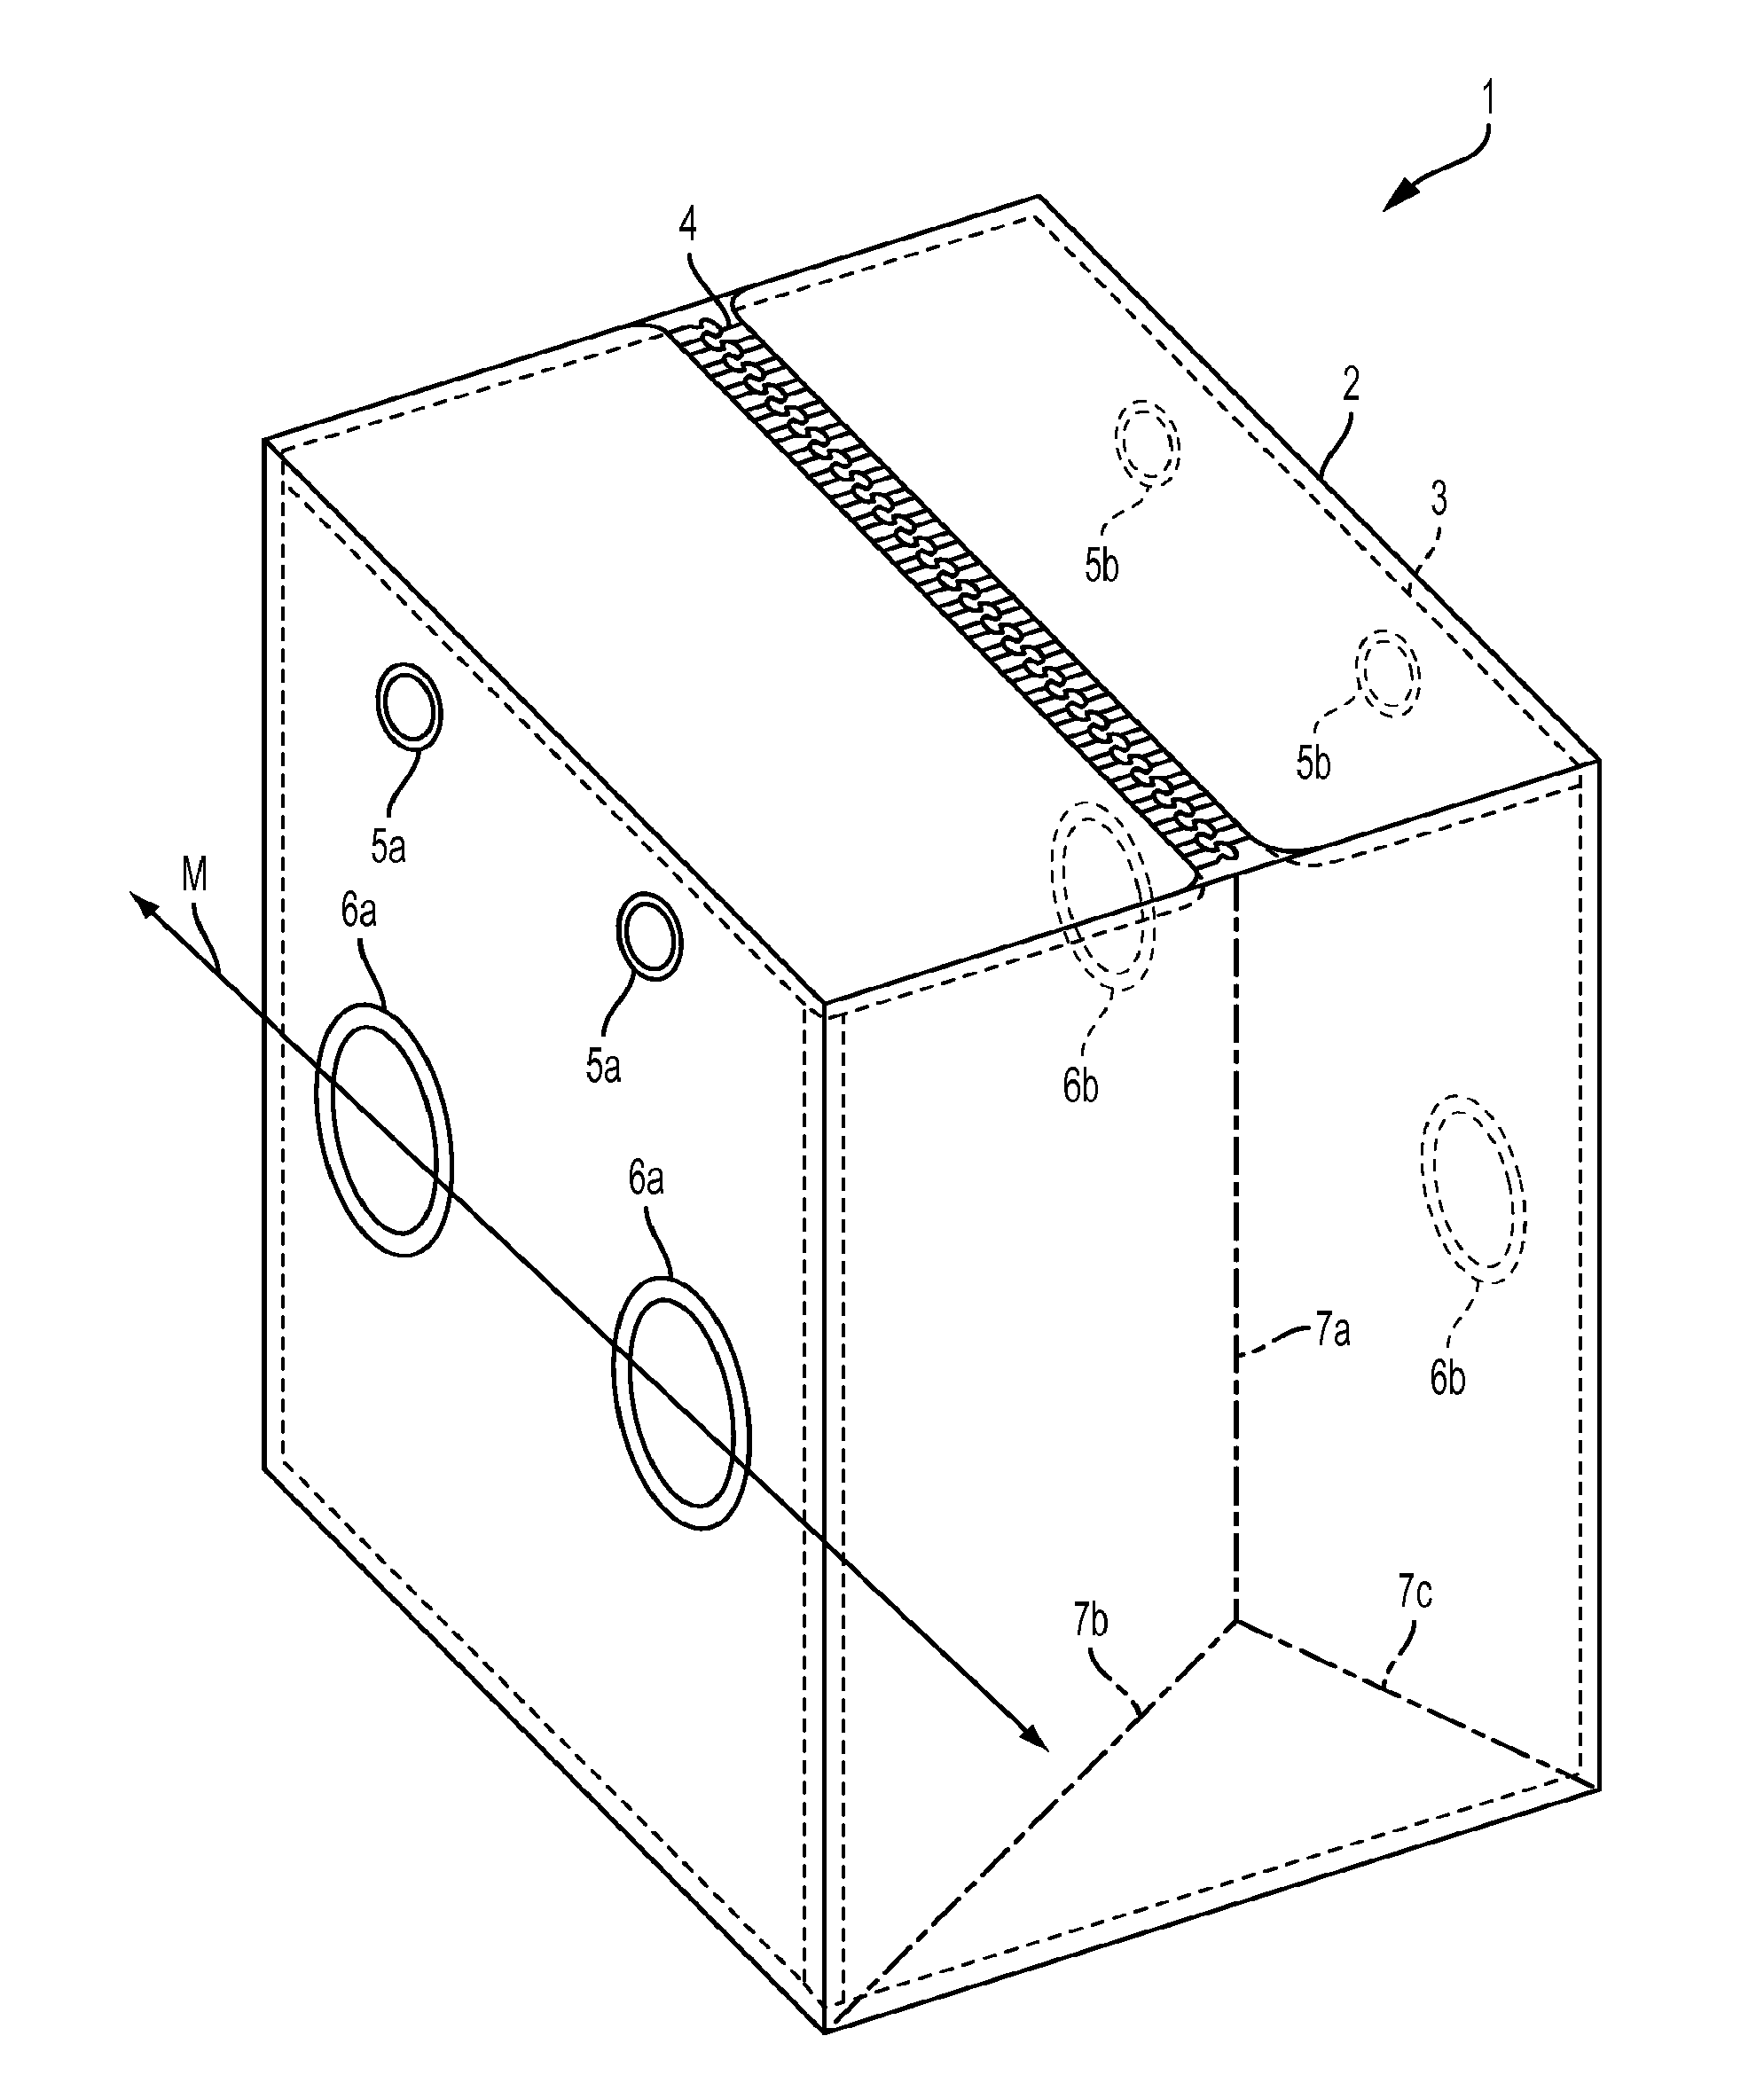 Portable bag having integrated handling openings and improved volumetric characteristics and assembly for use therewith